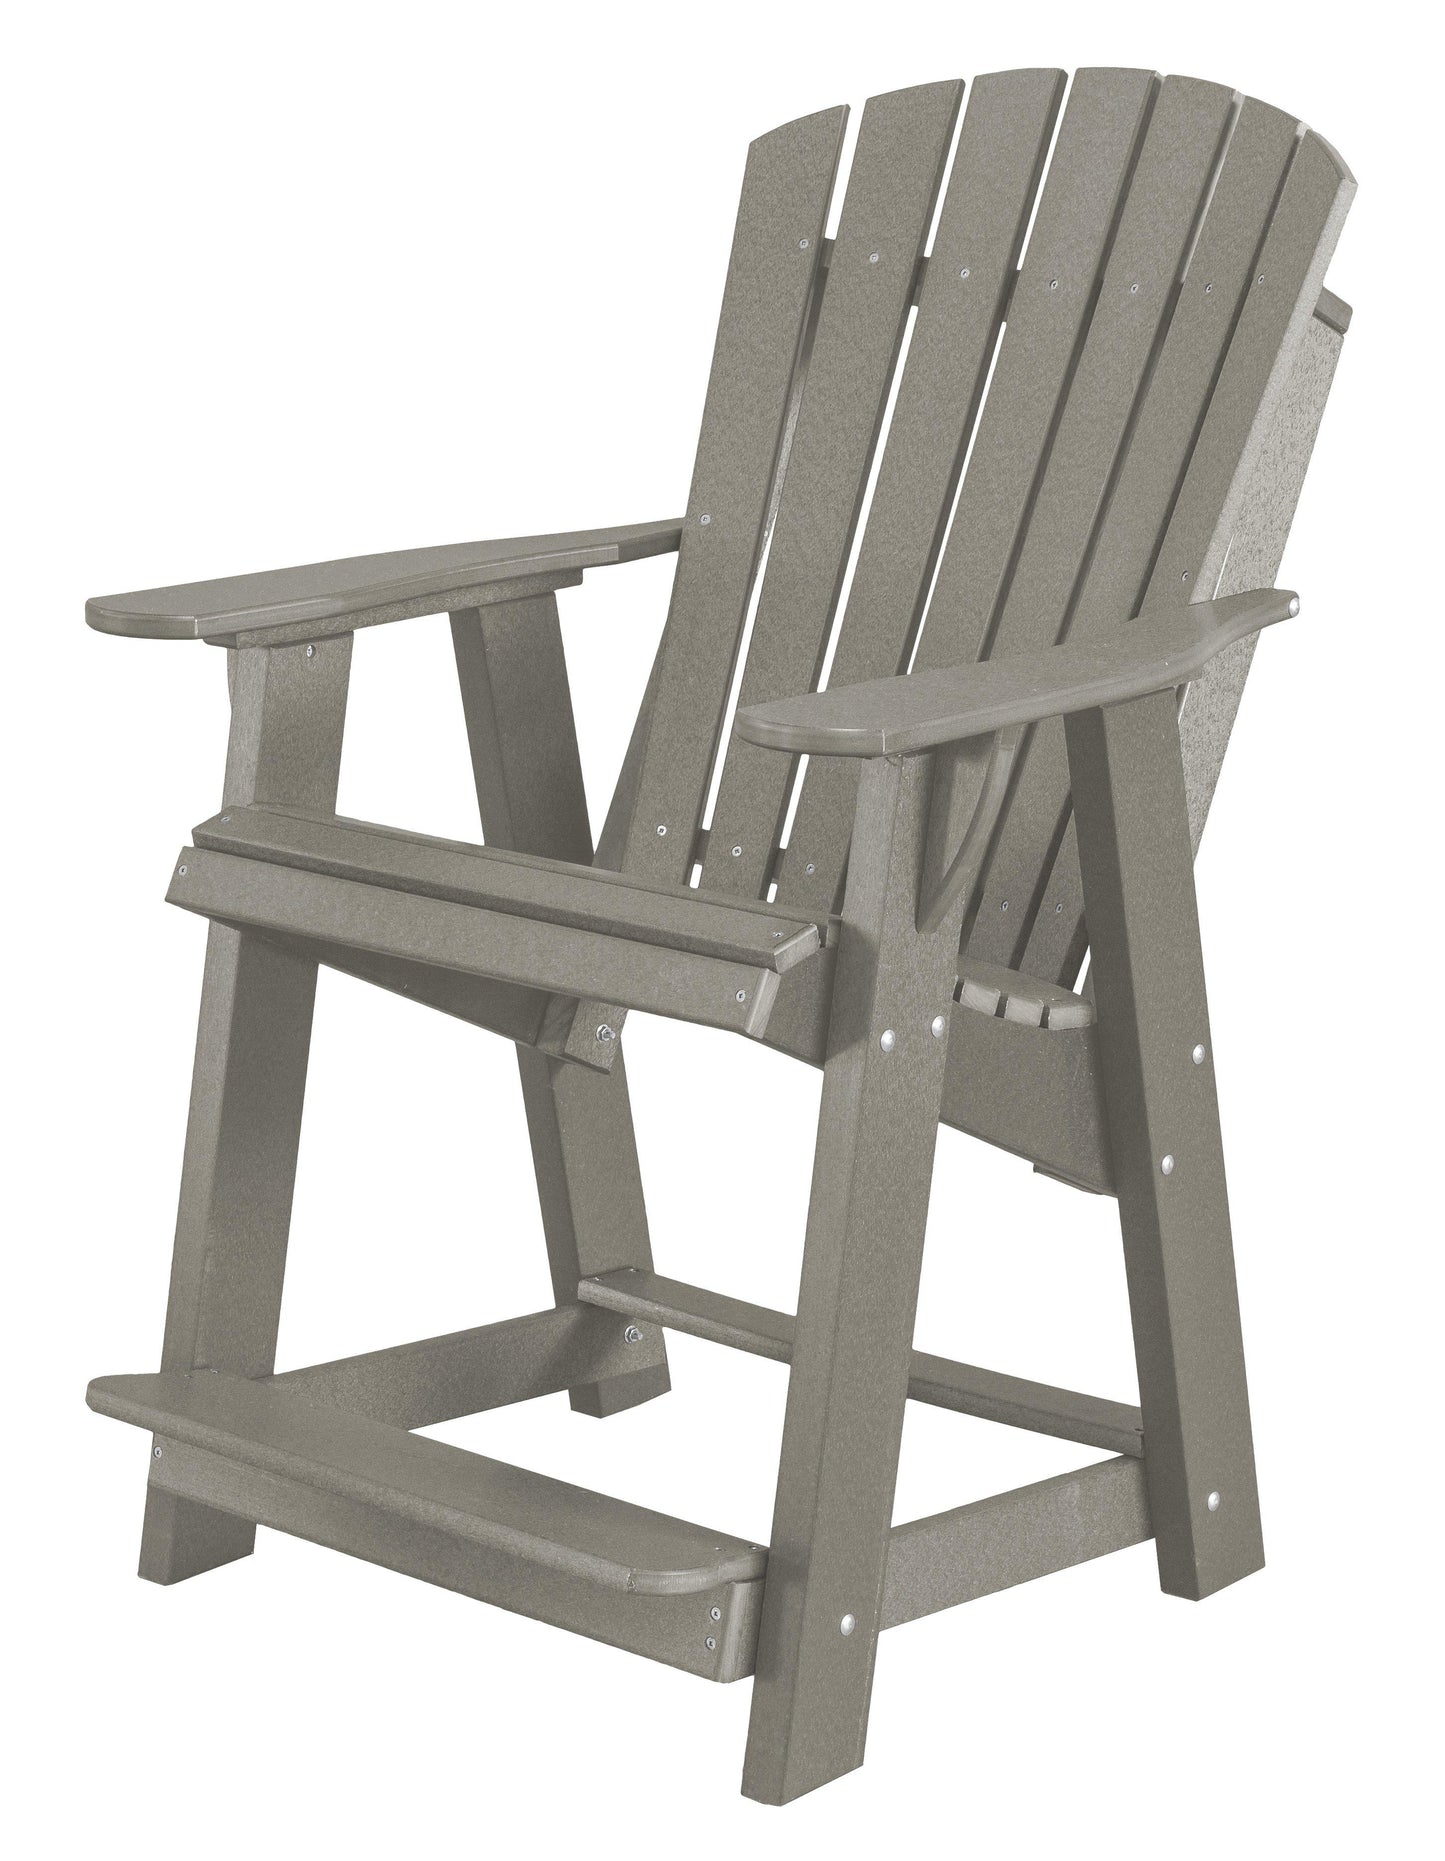 Wildridge Recycled Plastic High Adirondack Chair Table Set (COUNTER HEIGHT) - LEAD TIME TO SHIP 3 WEEKS